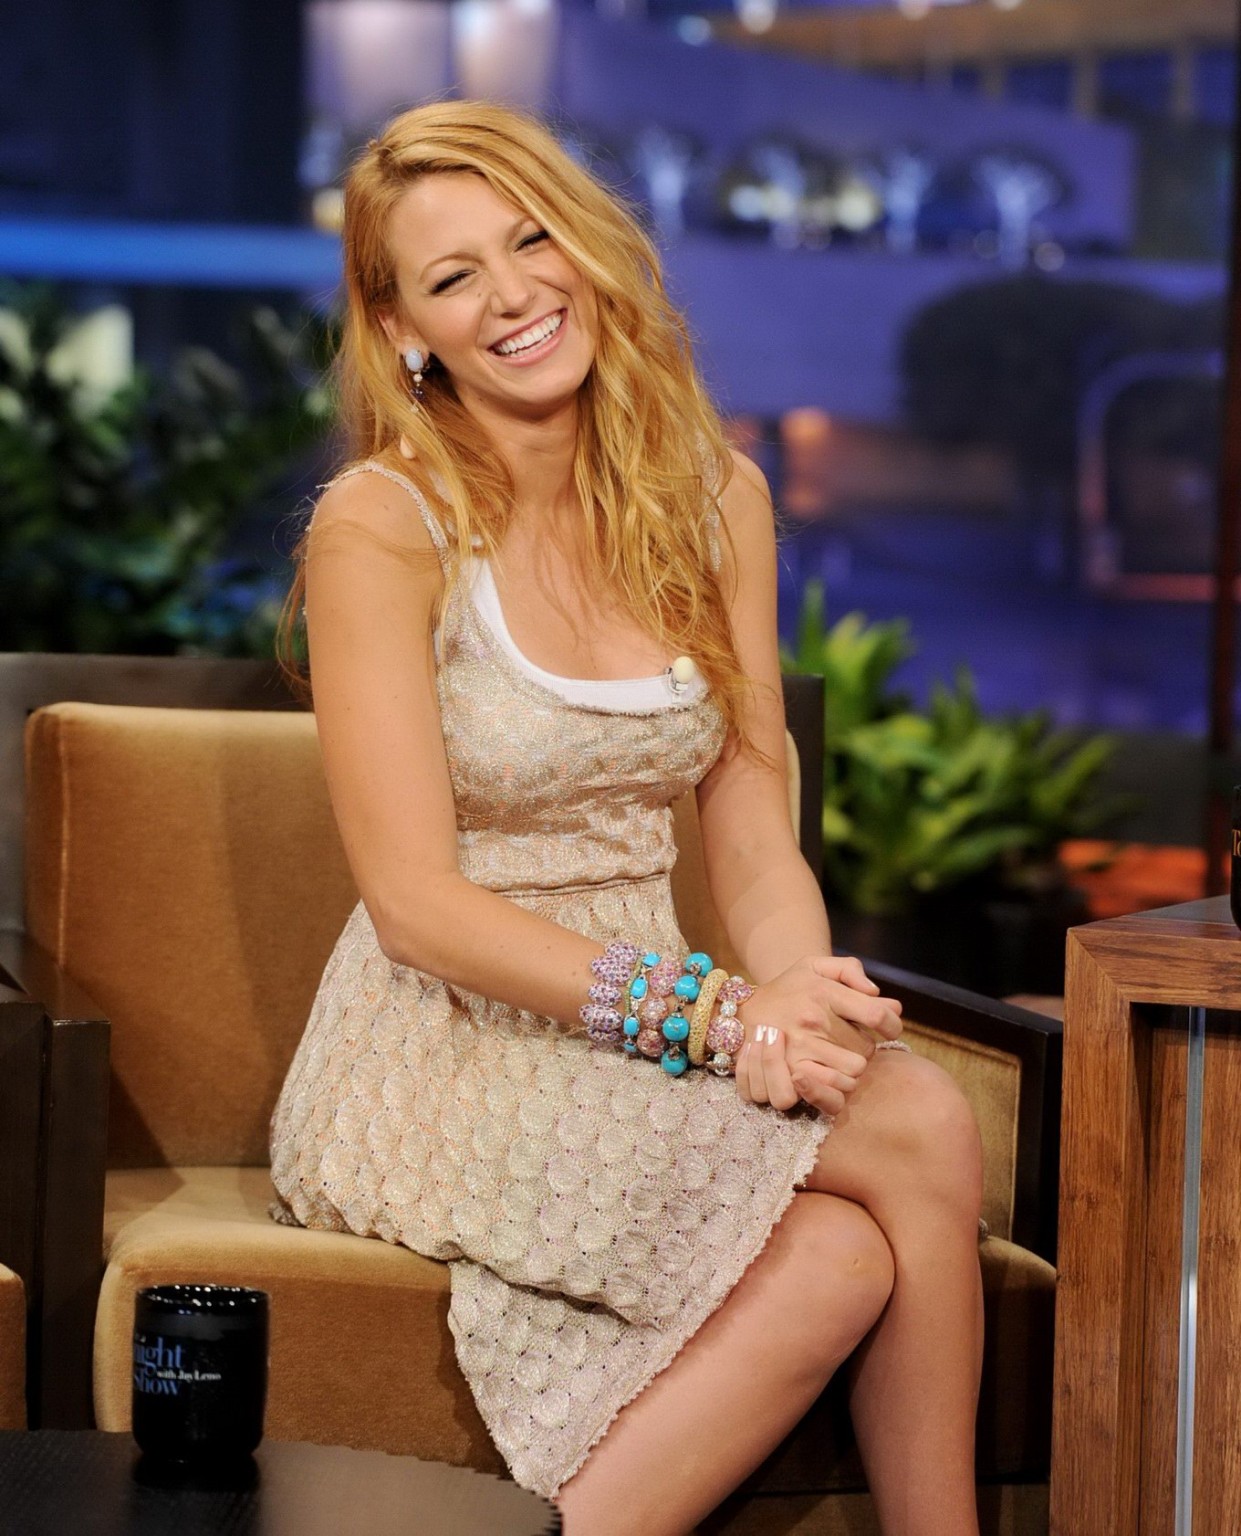 Blake Lively looks very sexy guesting on Jey Leno show #75299575